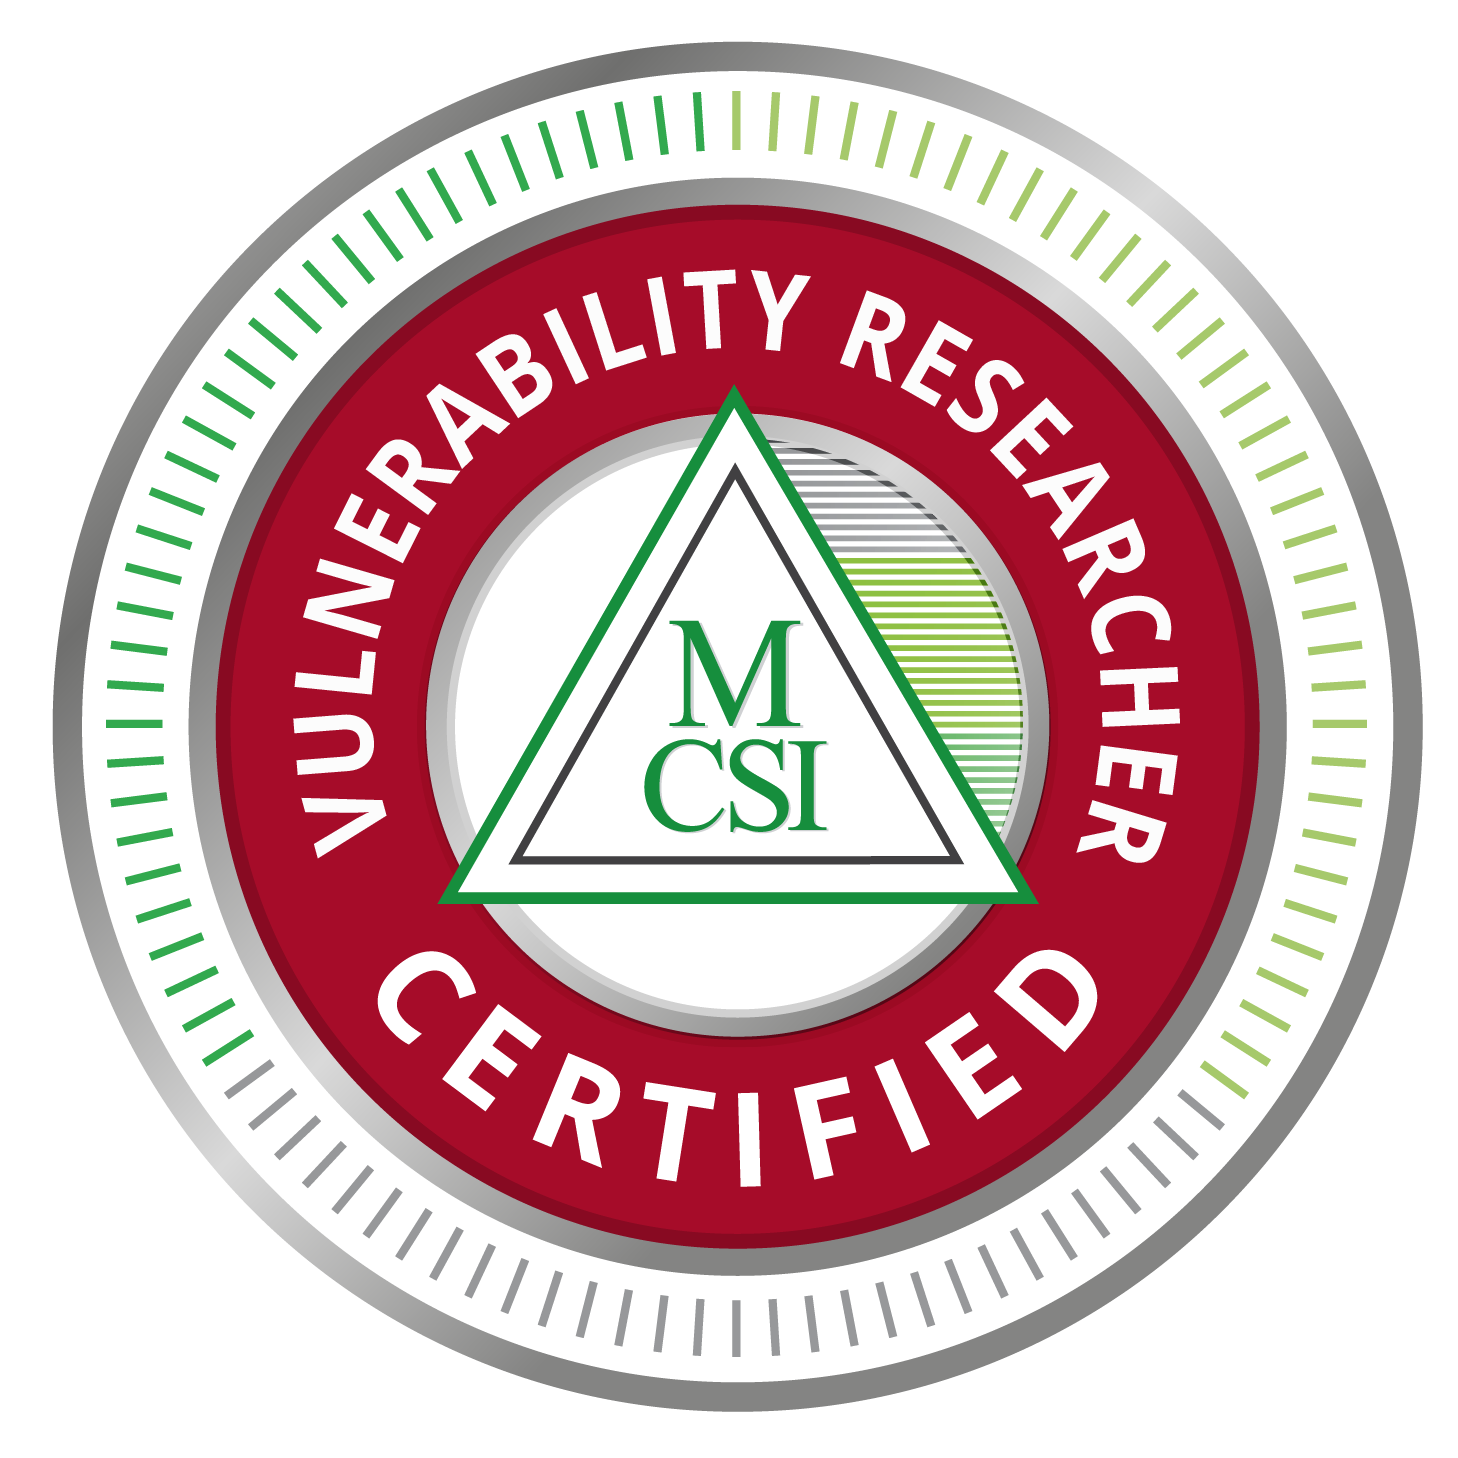 Cybersecurity Certification - Mossé Cyber Security Institute MVRE Certified Vulnerability Researcher and Exploitation Specialist Certification